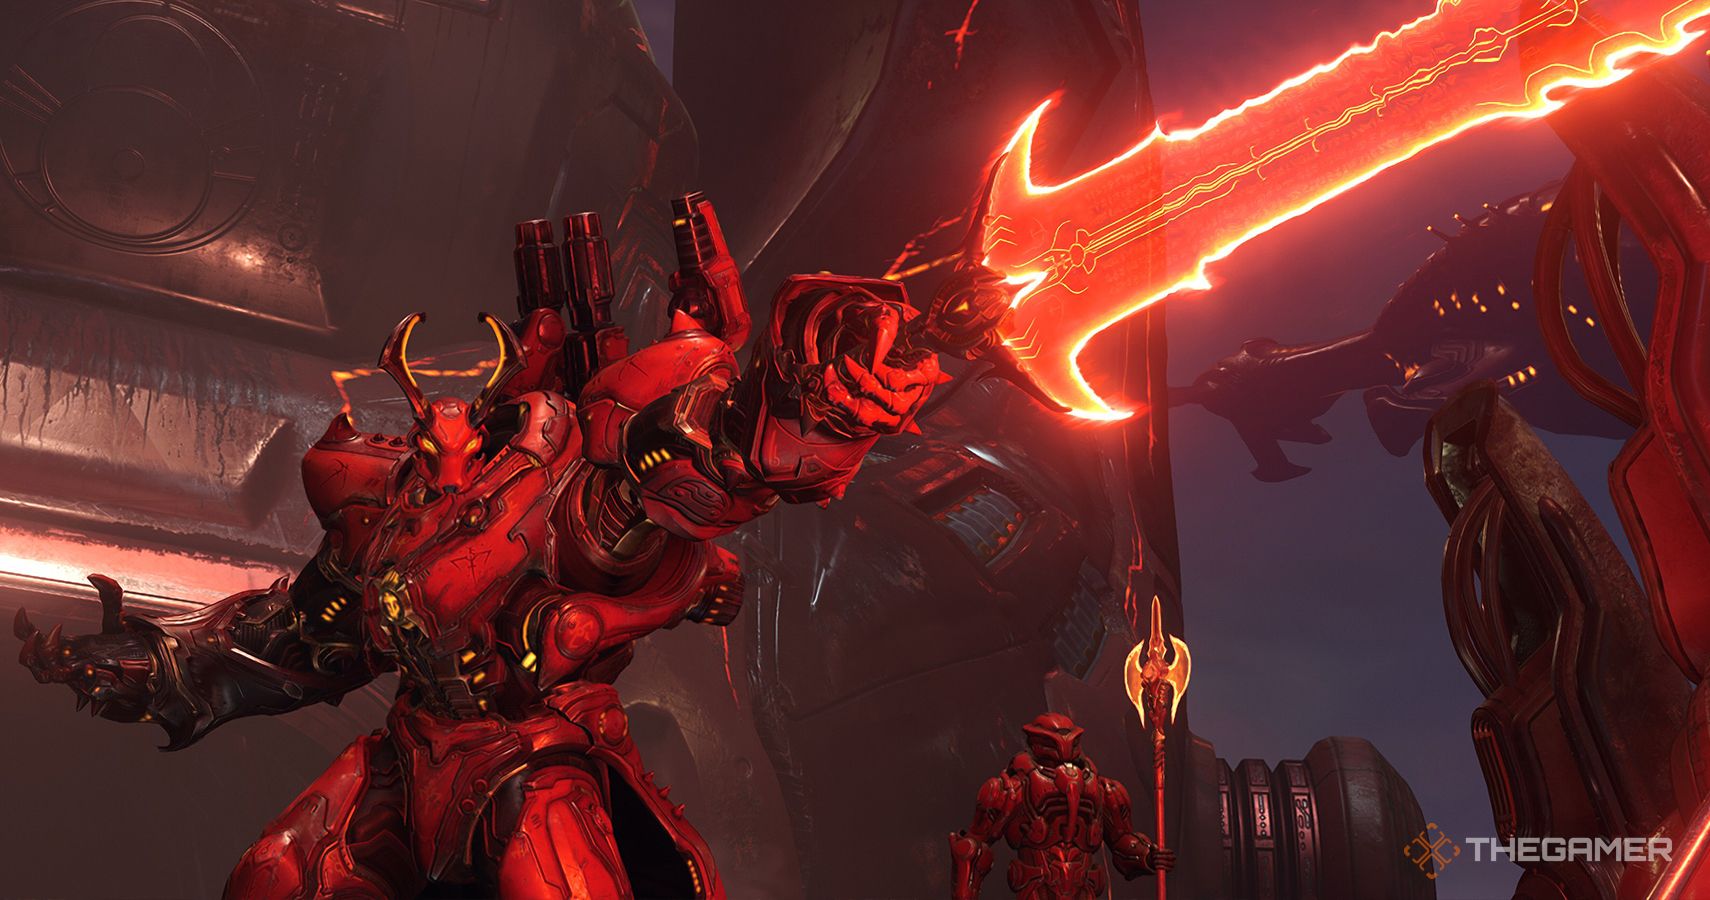 The Ending To The Ancient Gods Part 2 In Doom Eternal, Explained